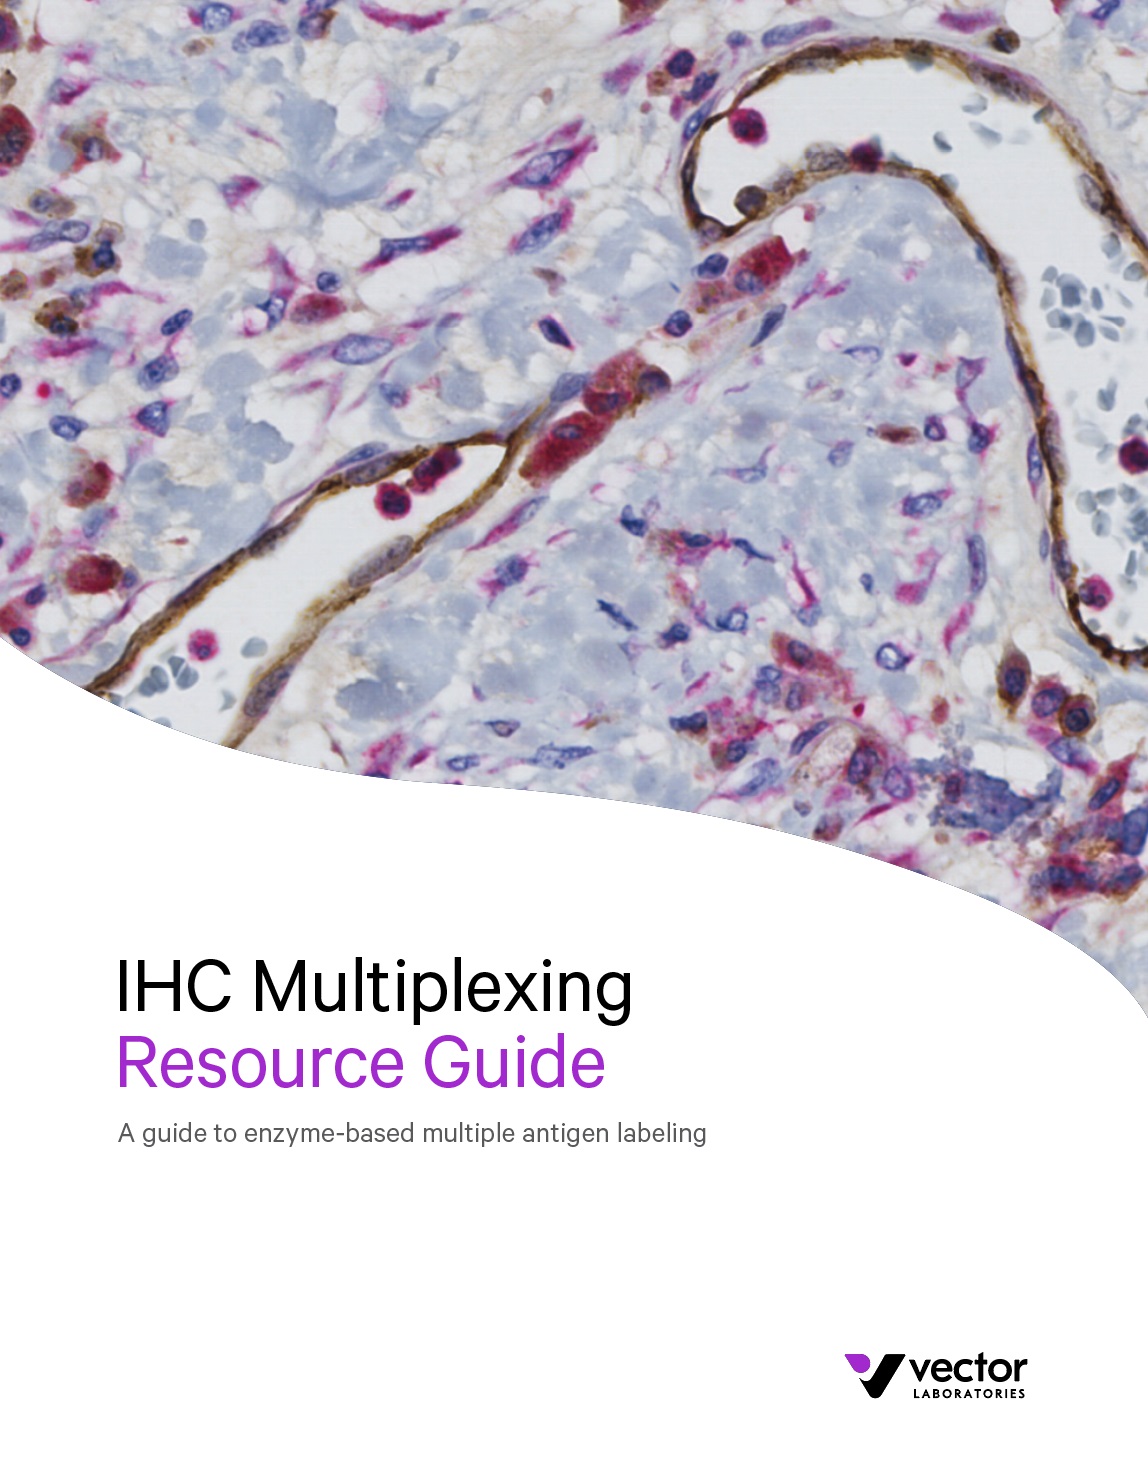 IHC Multiplexing Guide